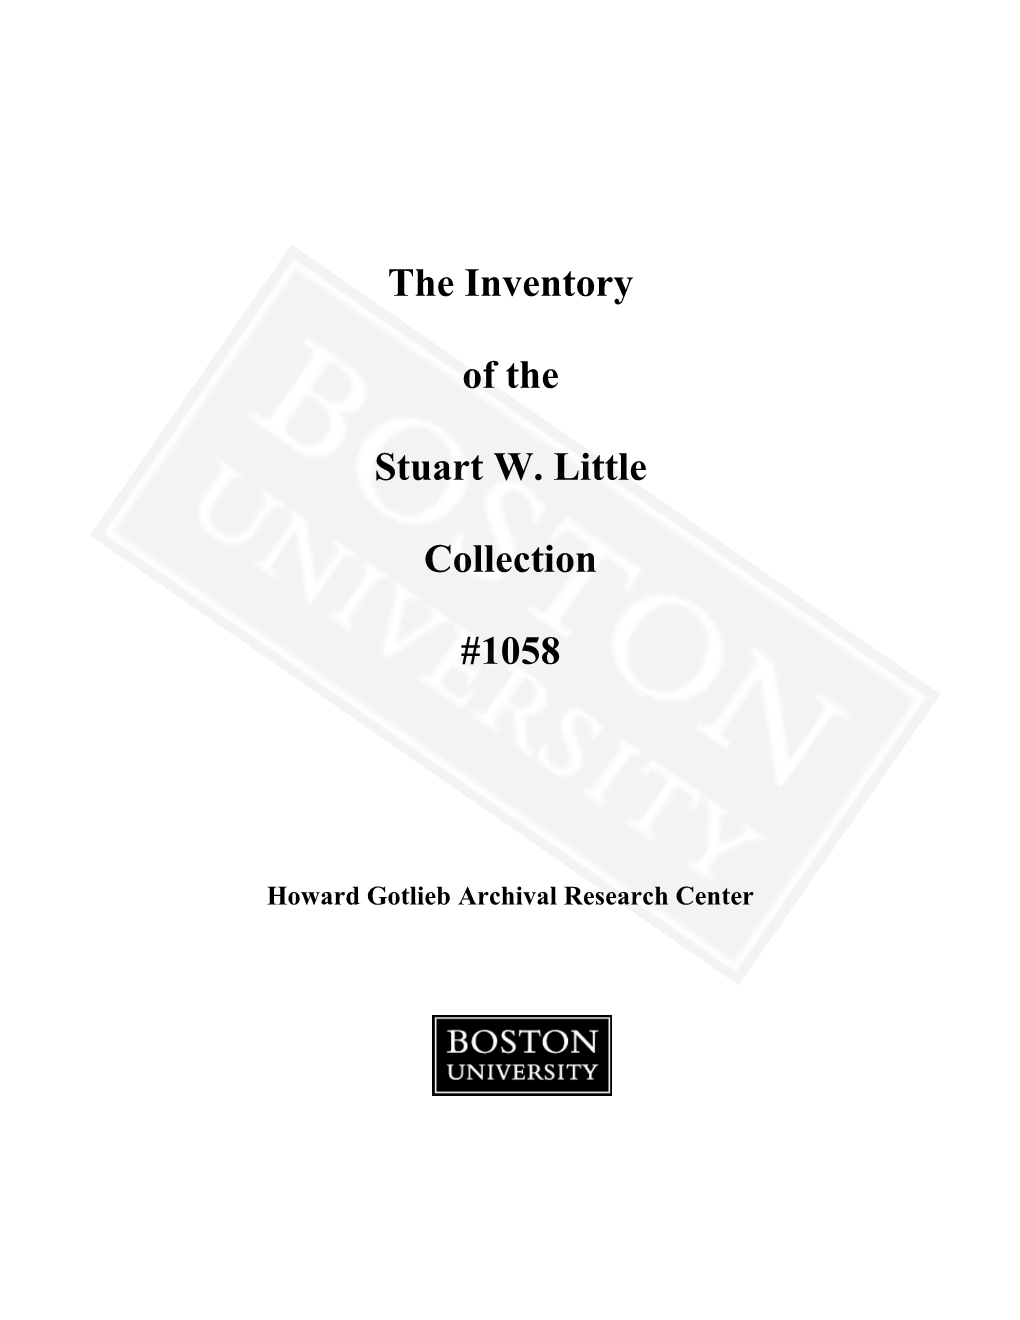 The Inventory of the Stuart W. Little Collection #1058